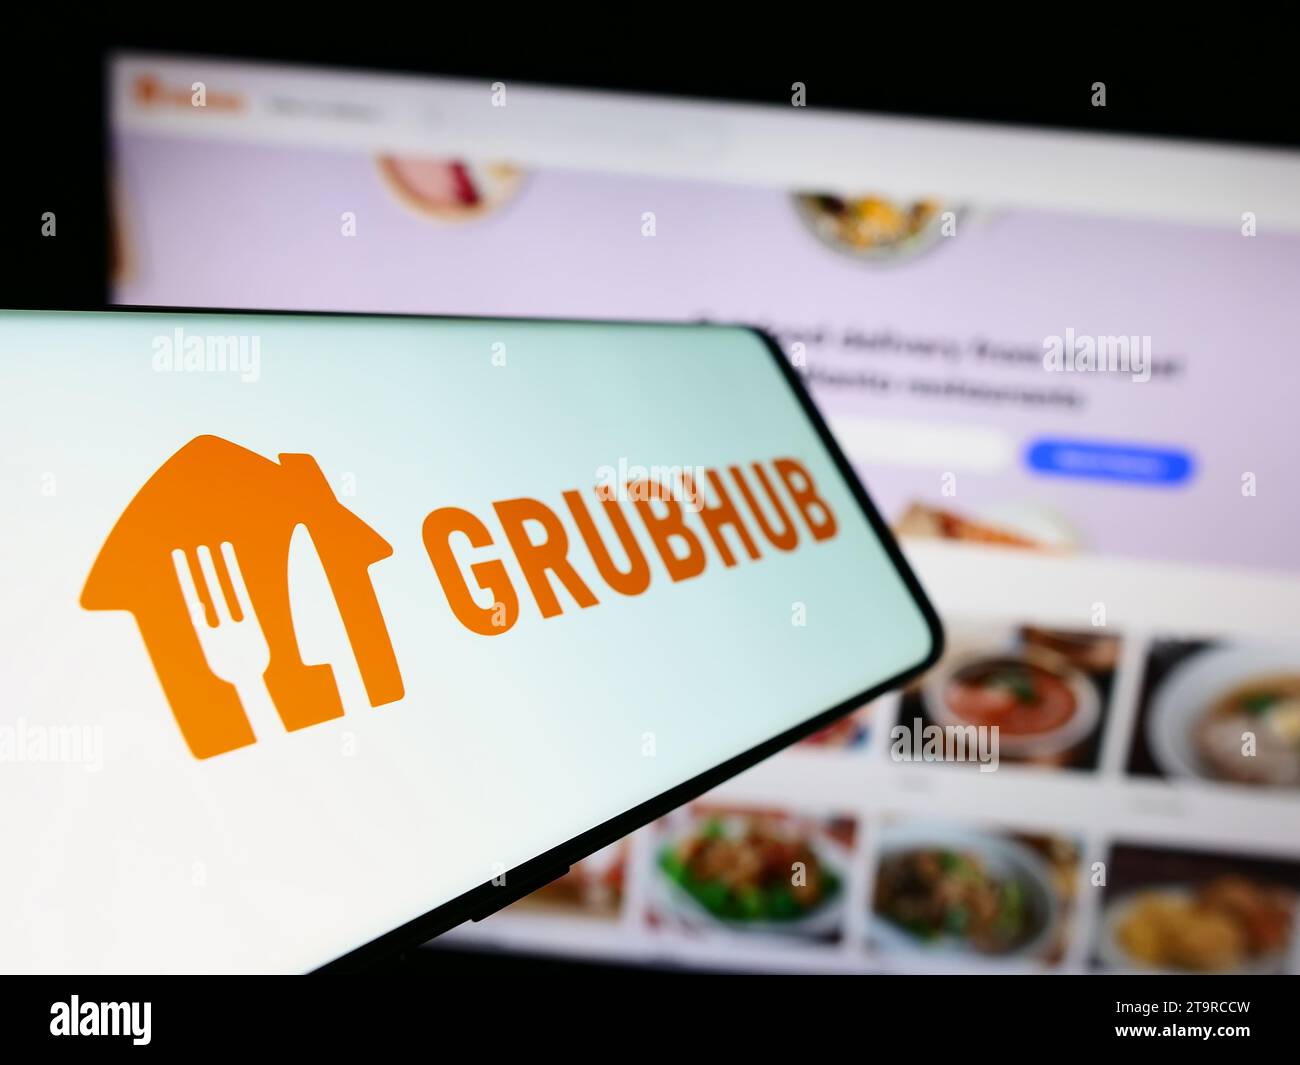 Mobile phone with logo of American food ordering and delivery company Grubhub Inc. in front of website. Focus on center-left of phone display. Stock Photo